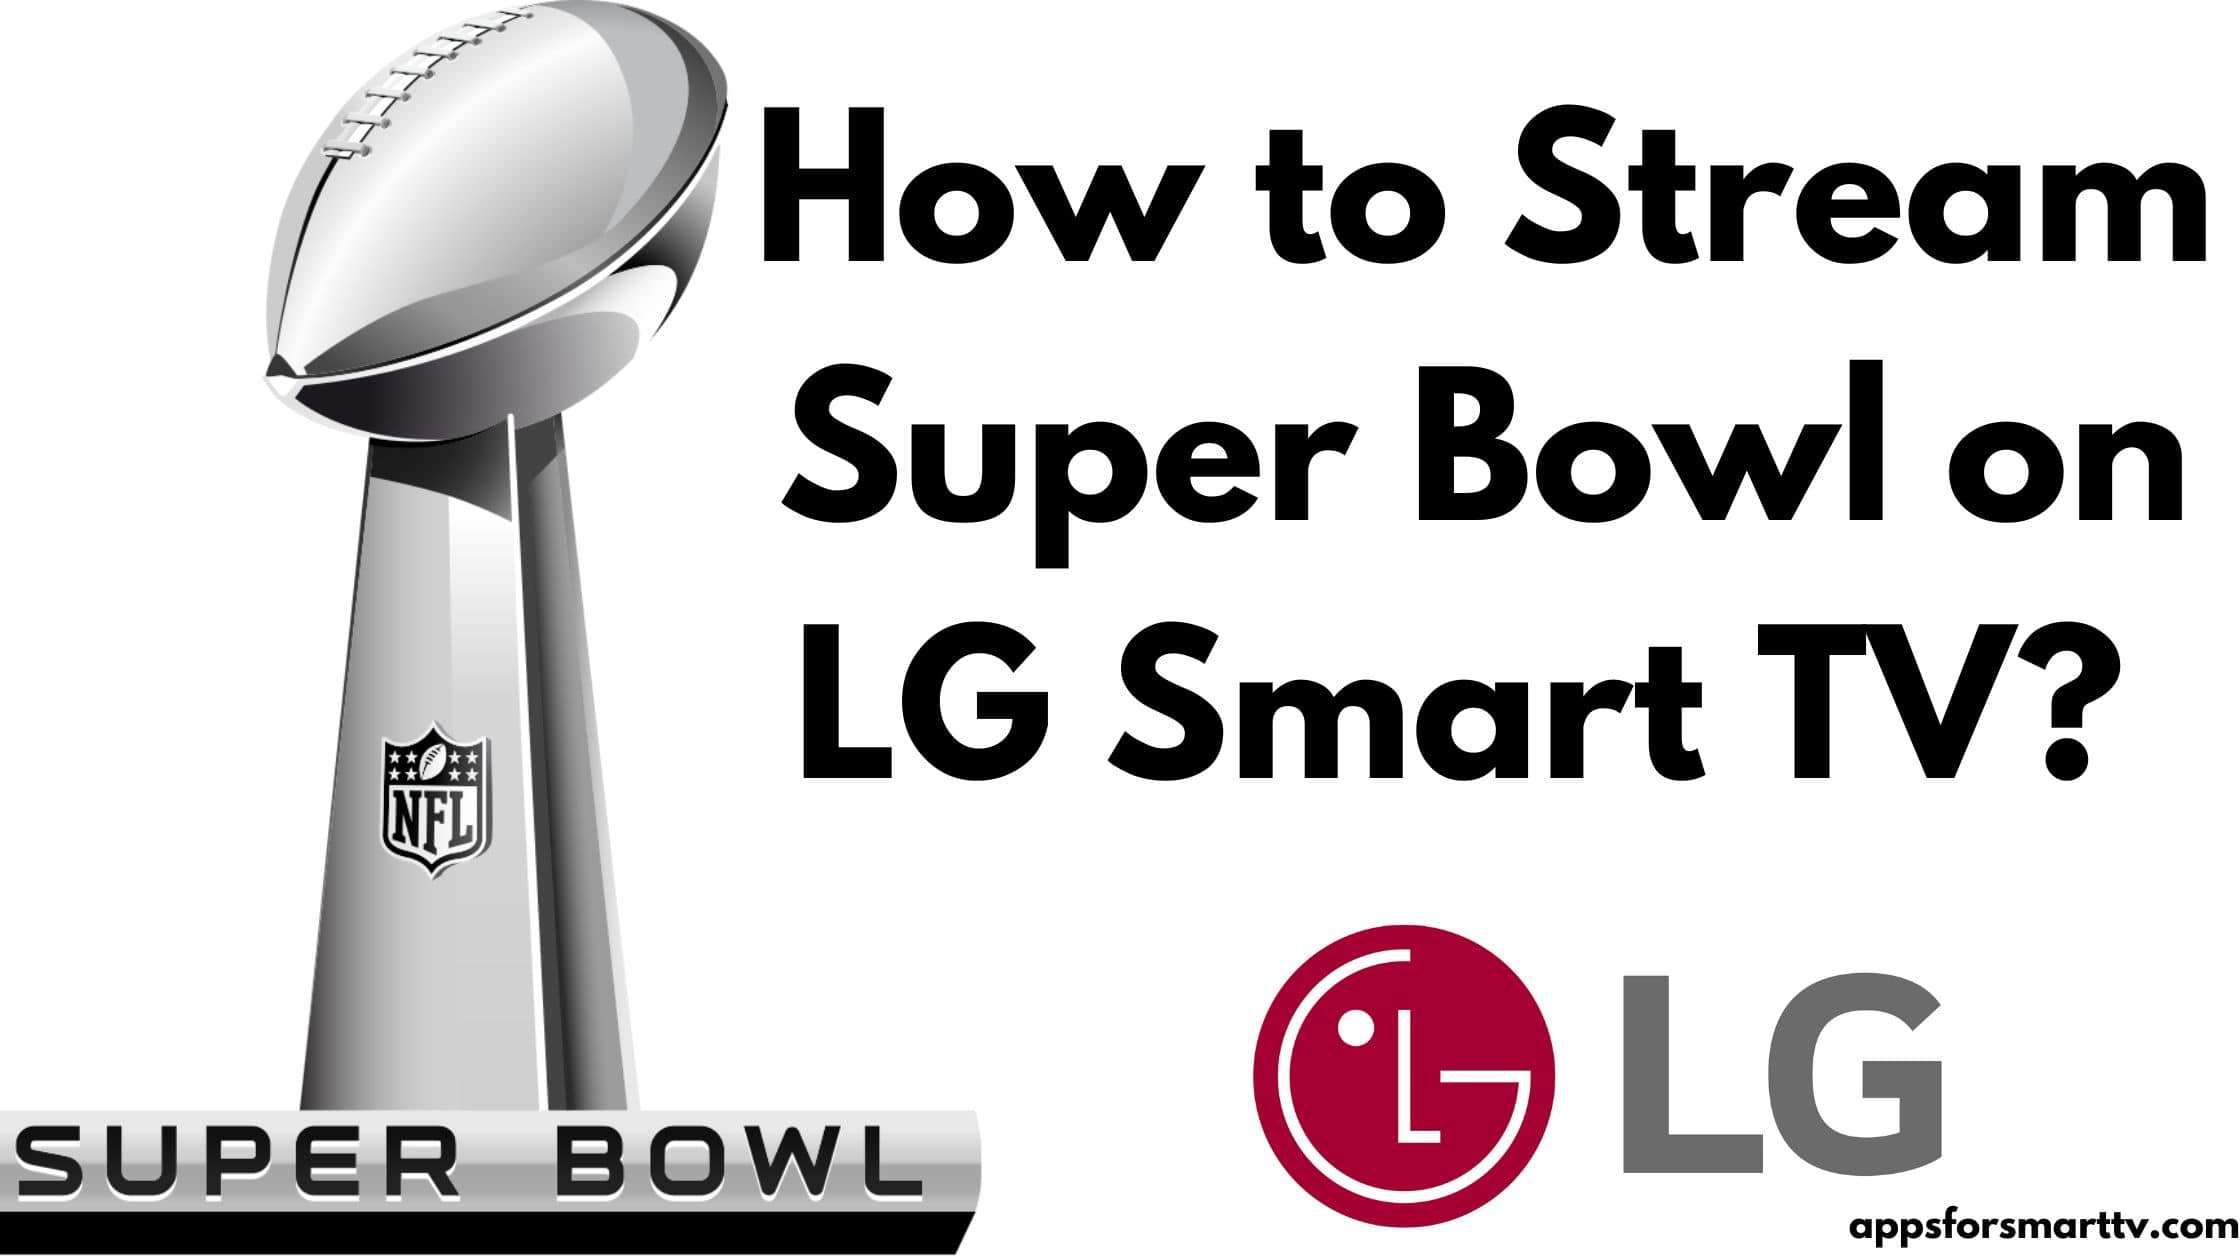 How to Stream Super Bowl on LG Smart TV